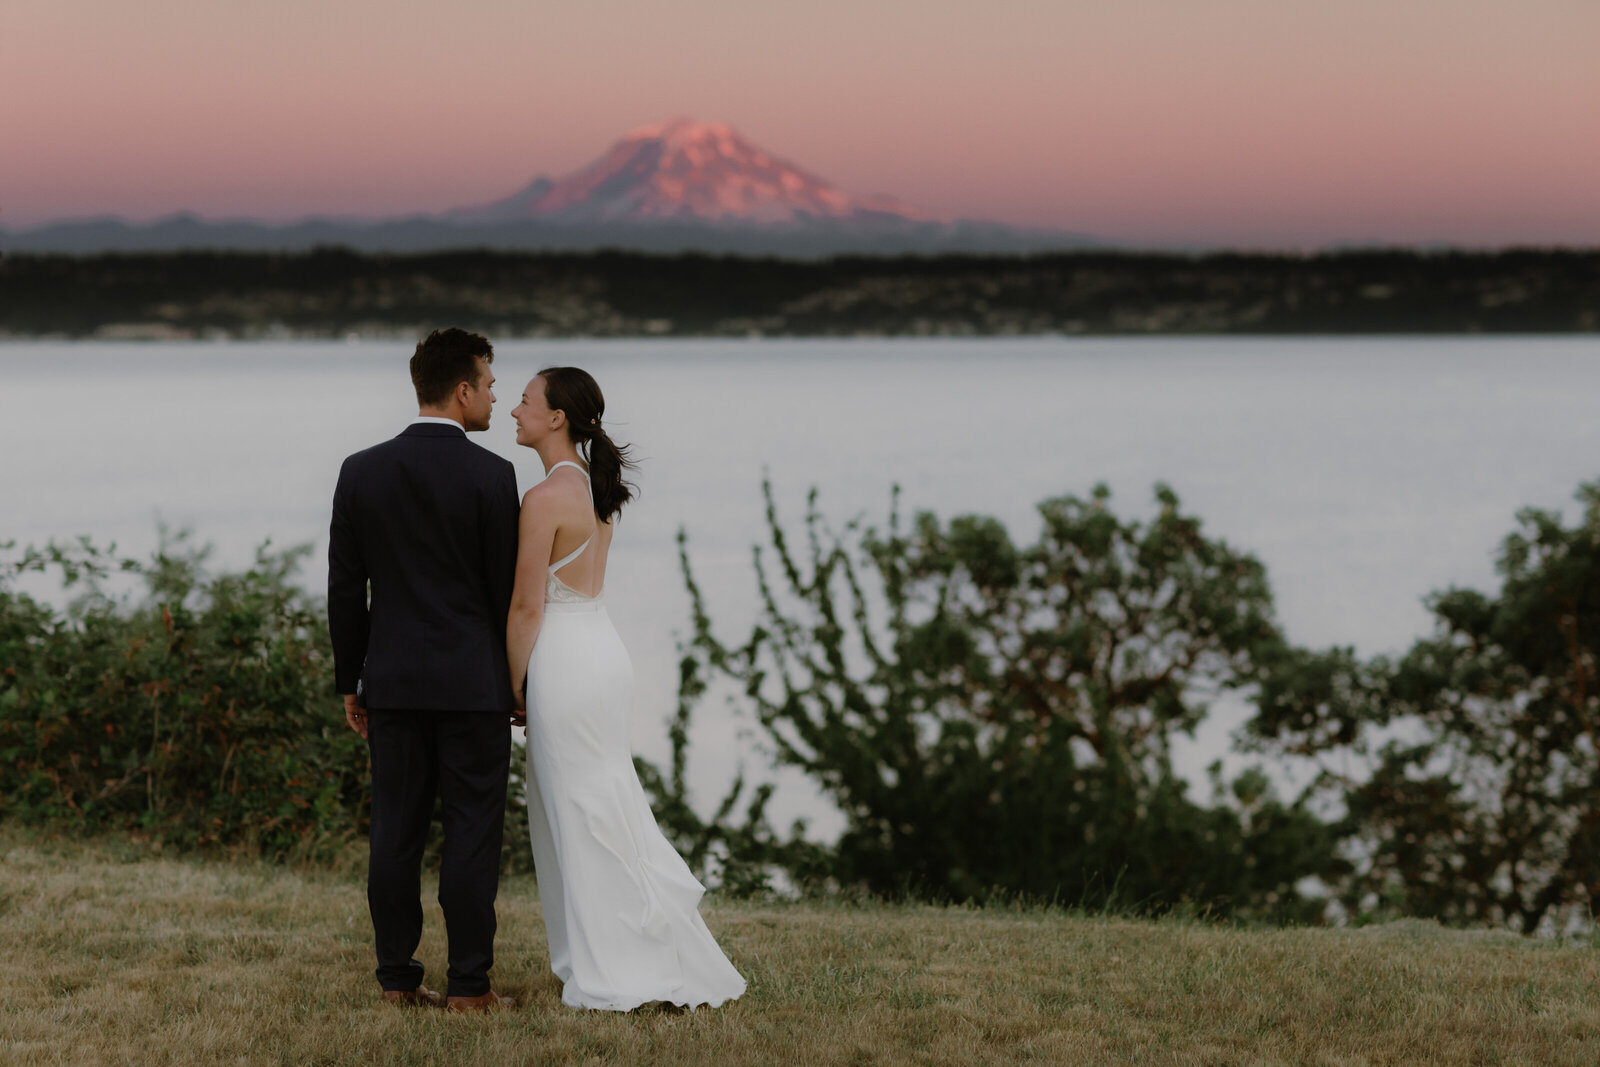 Bride and groom at sunset standing in a field on Vashon Island with Mount Rainier visible in the background.